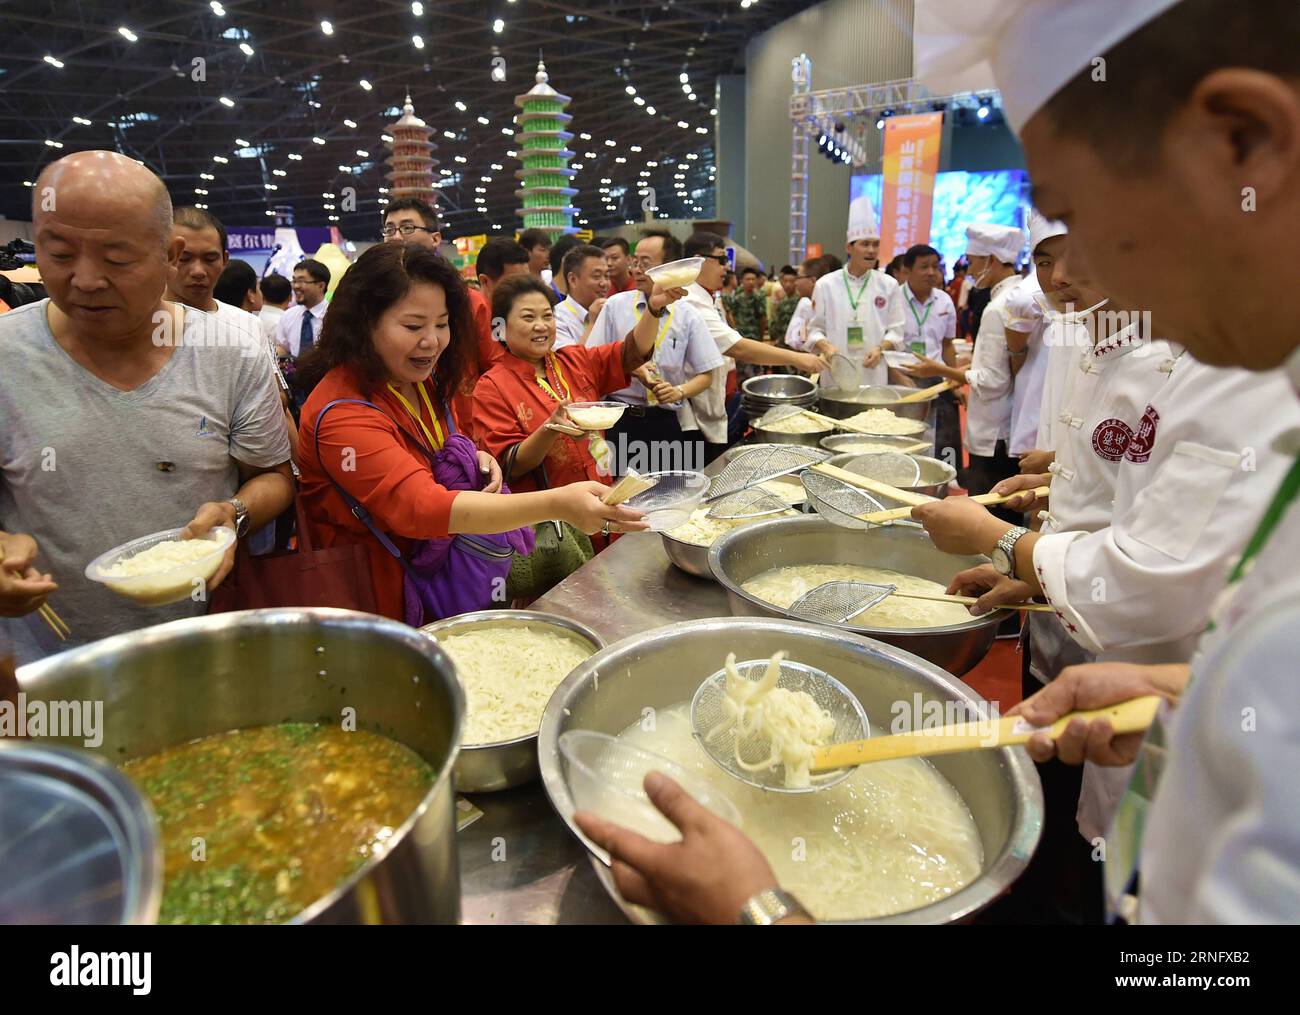 (160826) -- TAIYUAN, Aug. 26, 2016 -- Visitors have a taste of newly-cooked sliced noodles at the 1st Shanxi cooked wheaten food festival in Taiyuan, capital of north China s Shanxi Province, Aug. 26, 2016. The food festival kicked off here Friday. ) (yxb) CHINA-TAIYUAN-COOKED WHEATEN FOOD-FESTIVAL(CN) CaoxYang PUBLICATIONxNOTxINxCHN   160826 Taiyuan Aug 26 2016 Visitors have a Button of newly cooked sliced Noodles AT The 1st Shanxi cooked wheaten Food Festival in Taiyuan Capital of North China S Shanxi Province Aug 26 2016 The Food Festival kicked off Here Friday yxb China Taiyuan cooked whea Stock Photo